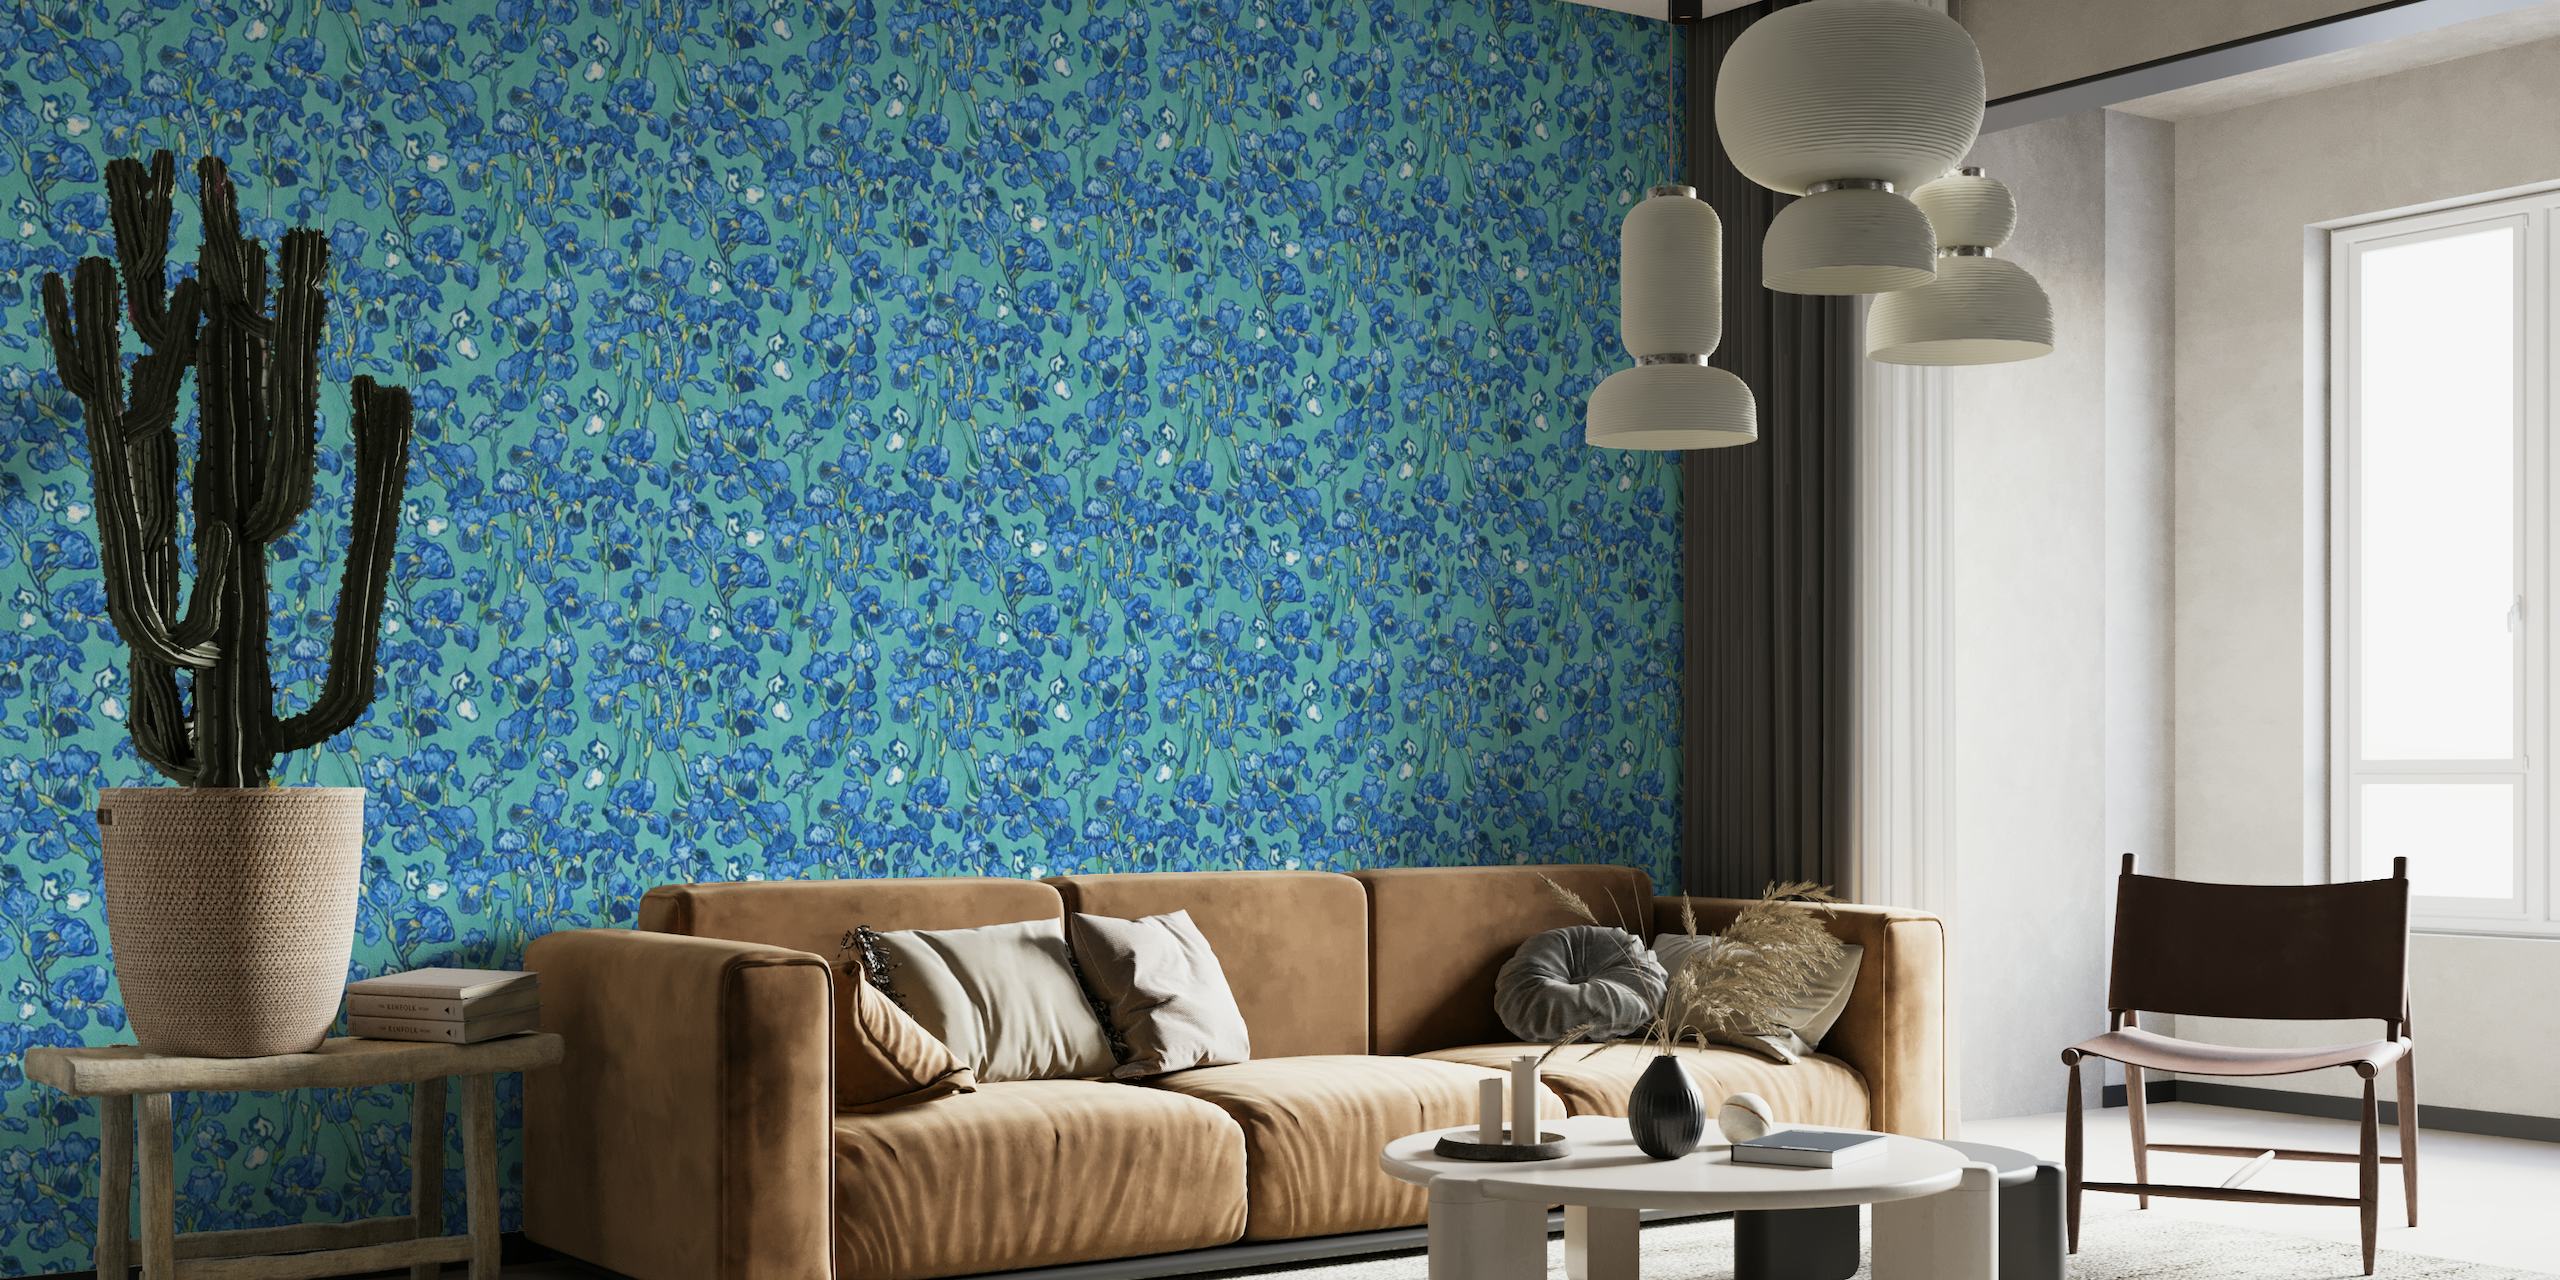 Van Gogh-inspired irises pattern wall mural in shades of cobalt, navy, and turquoise blue